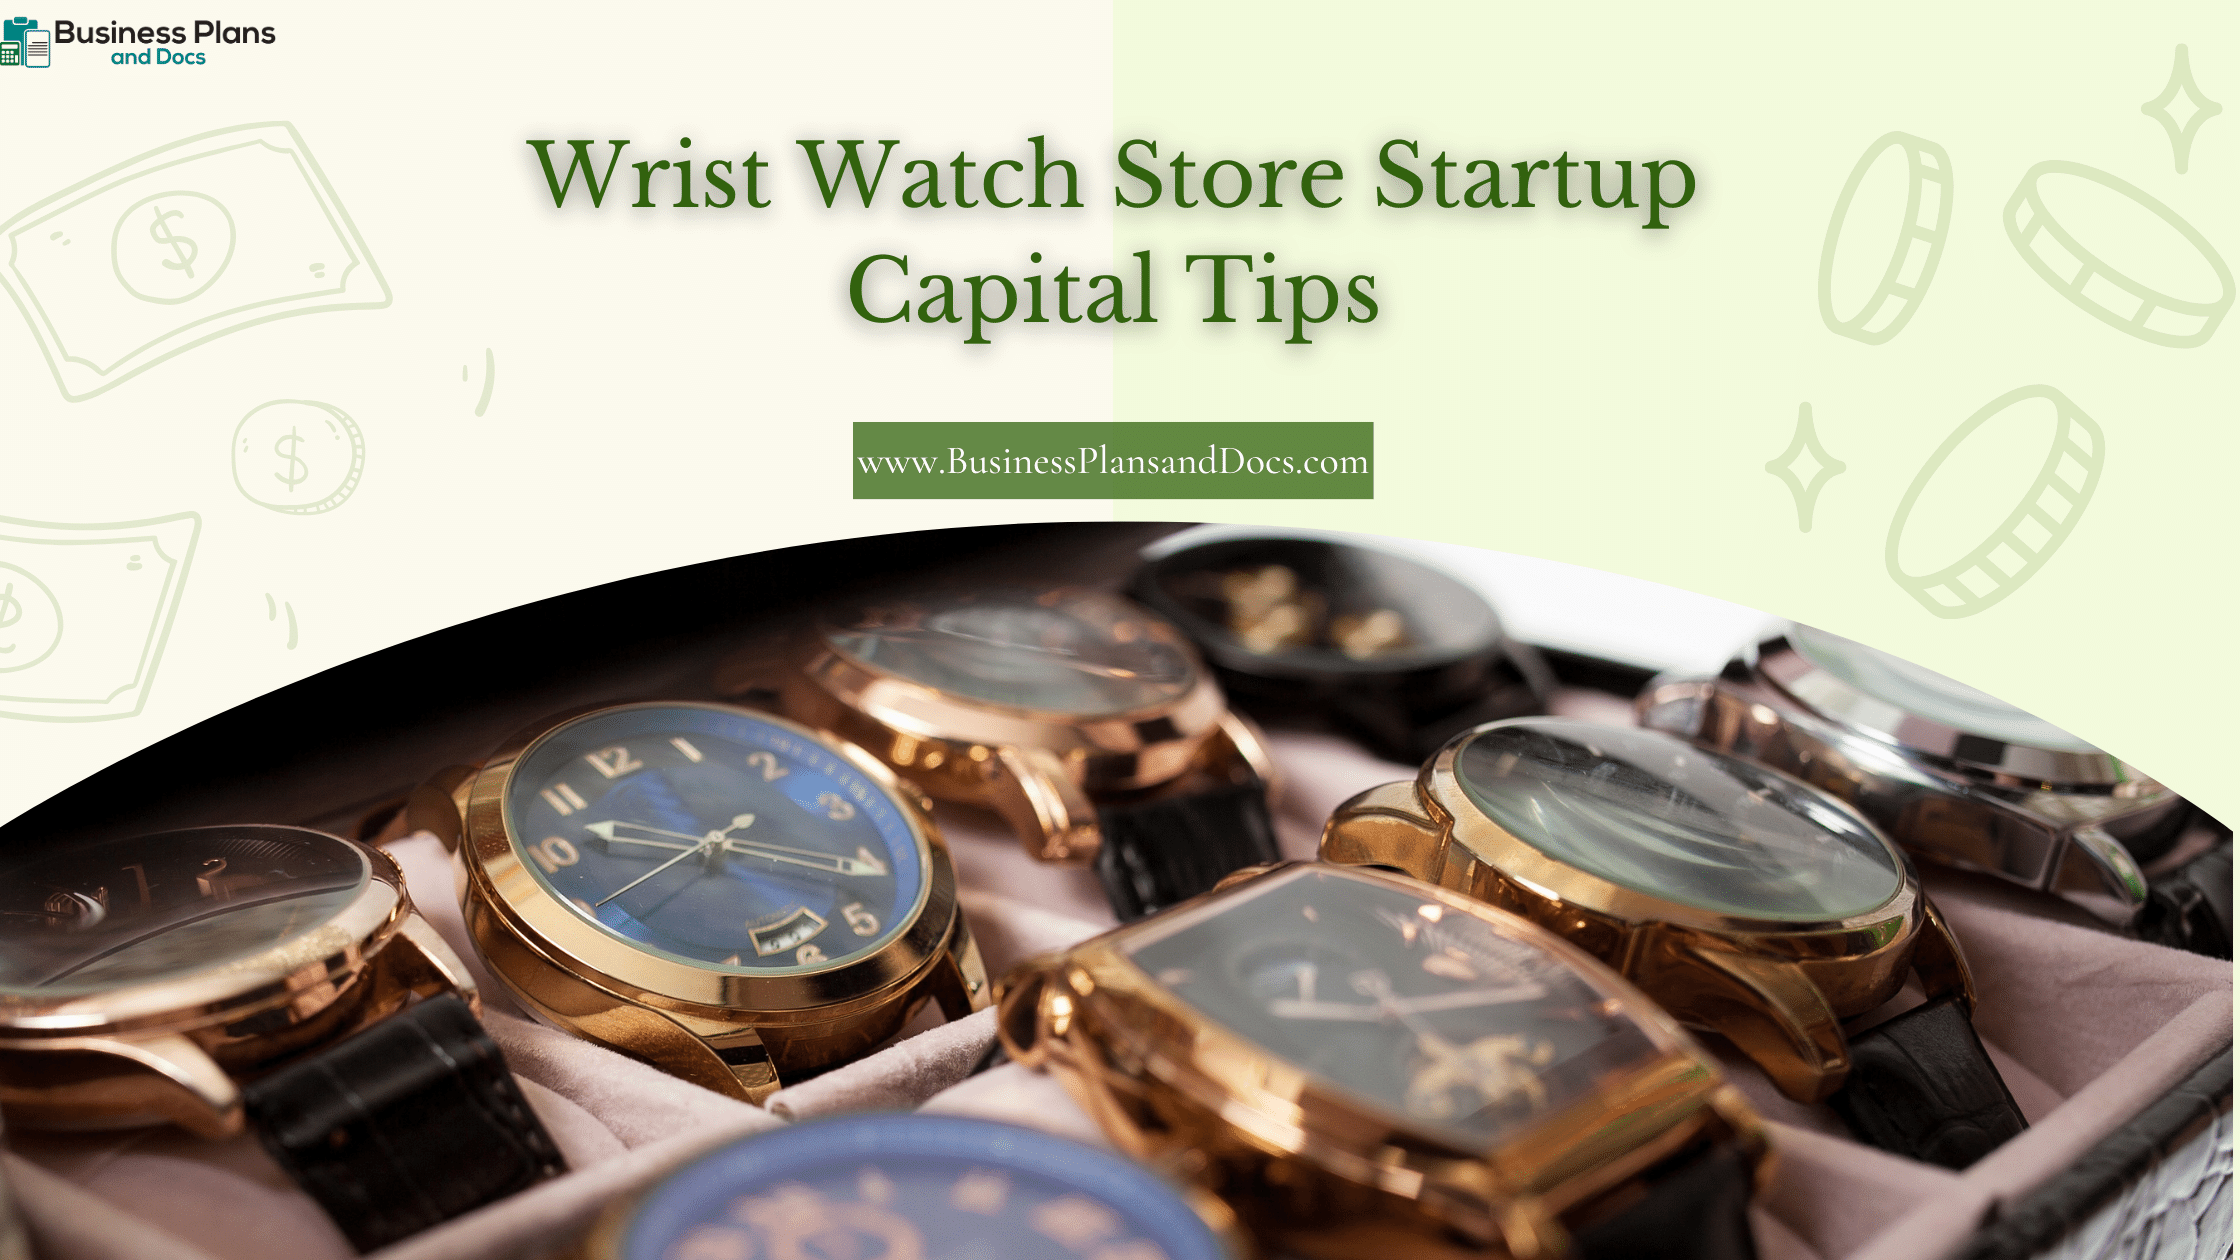 Wrist Watch Store Startup Capital Tips